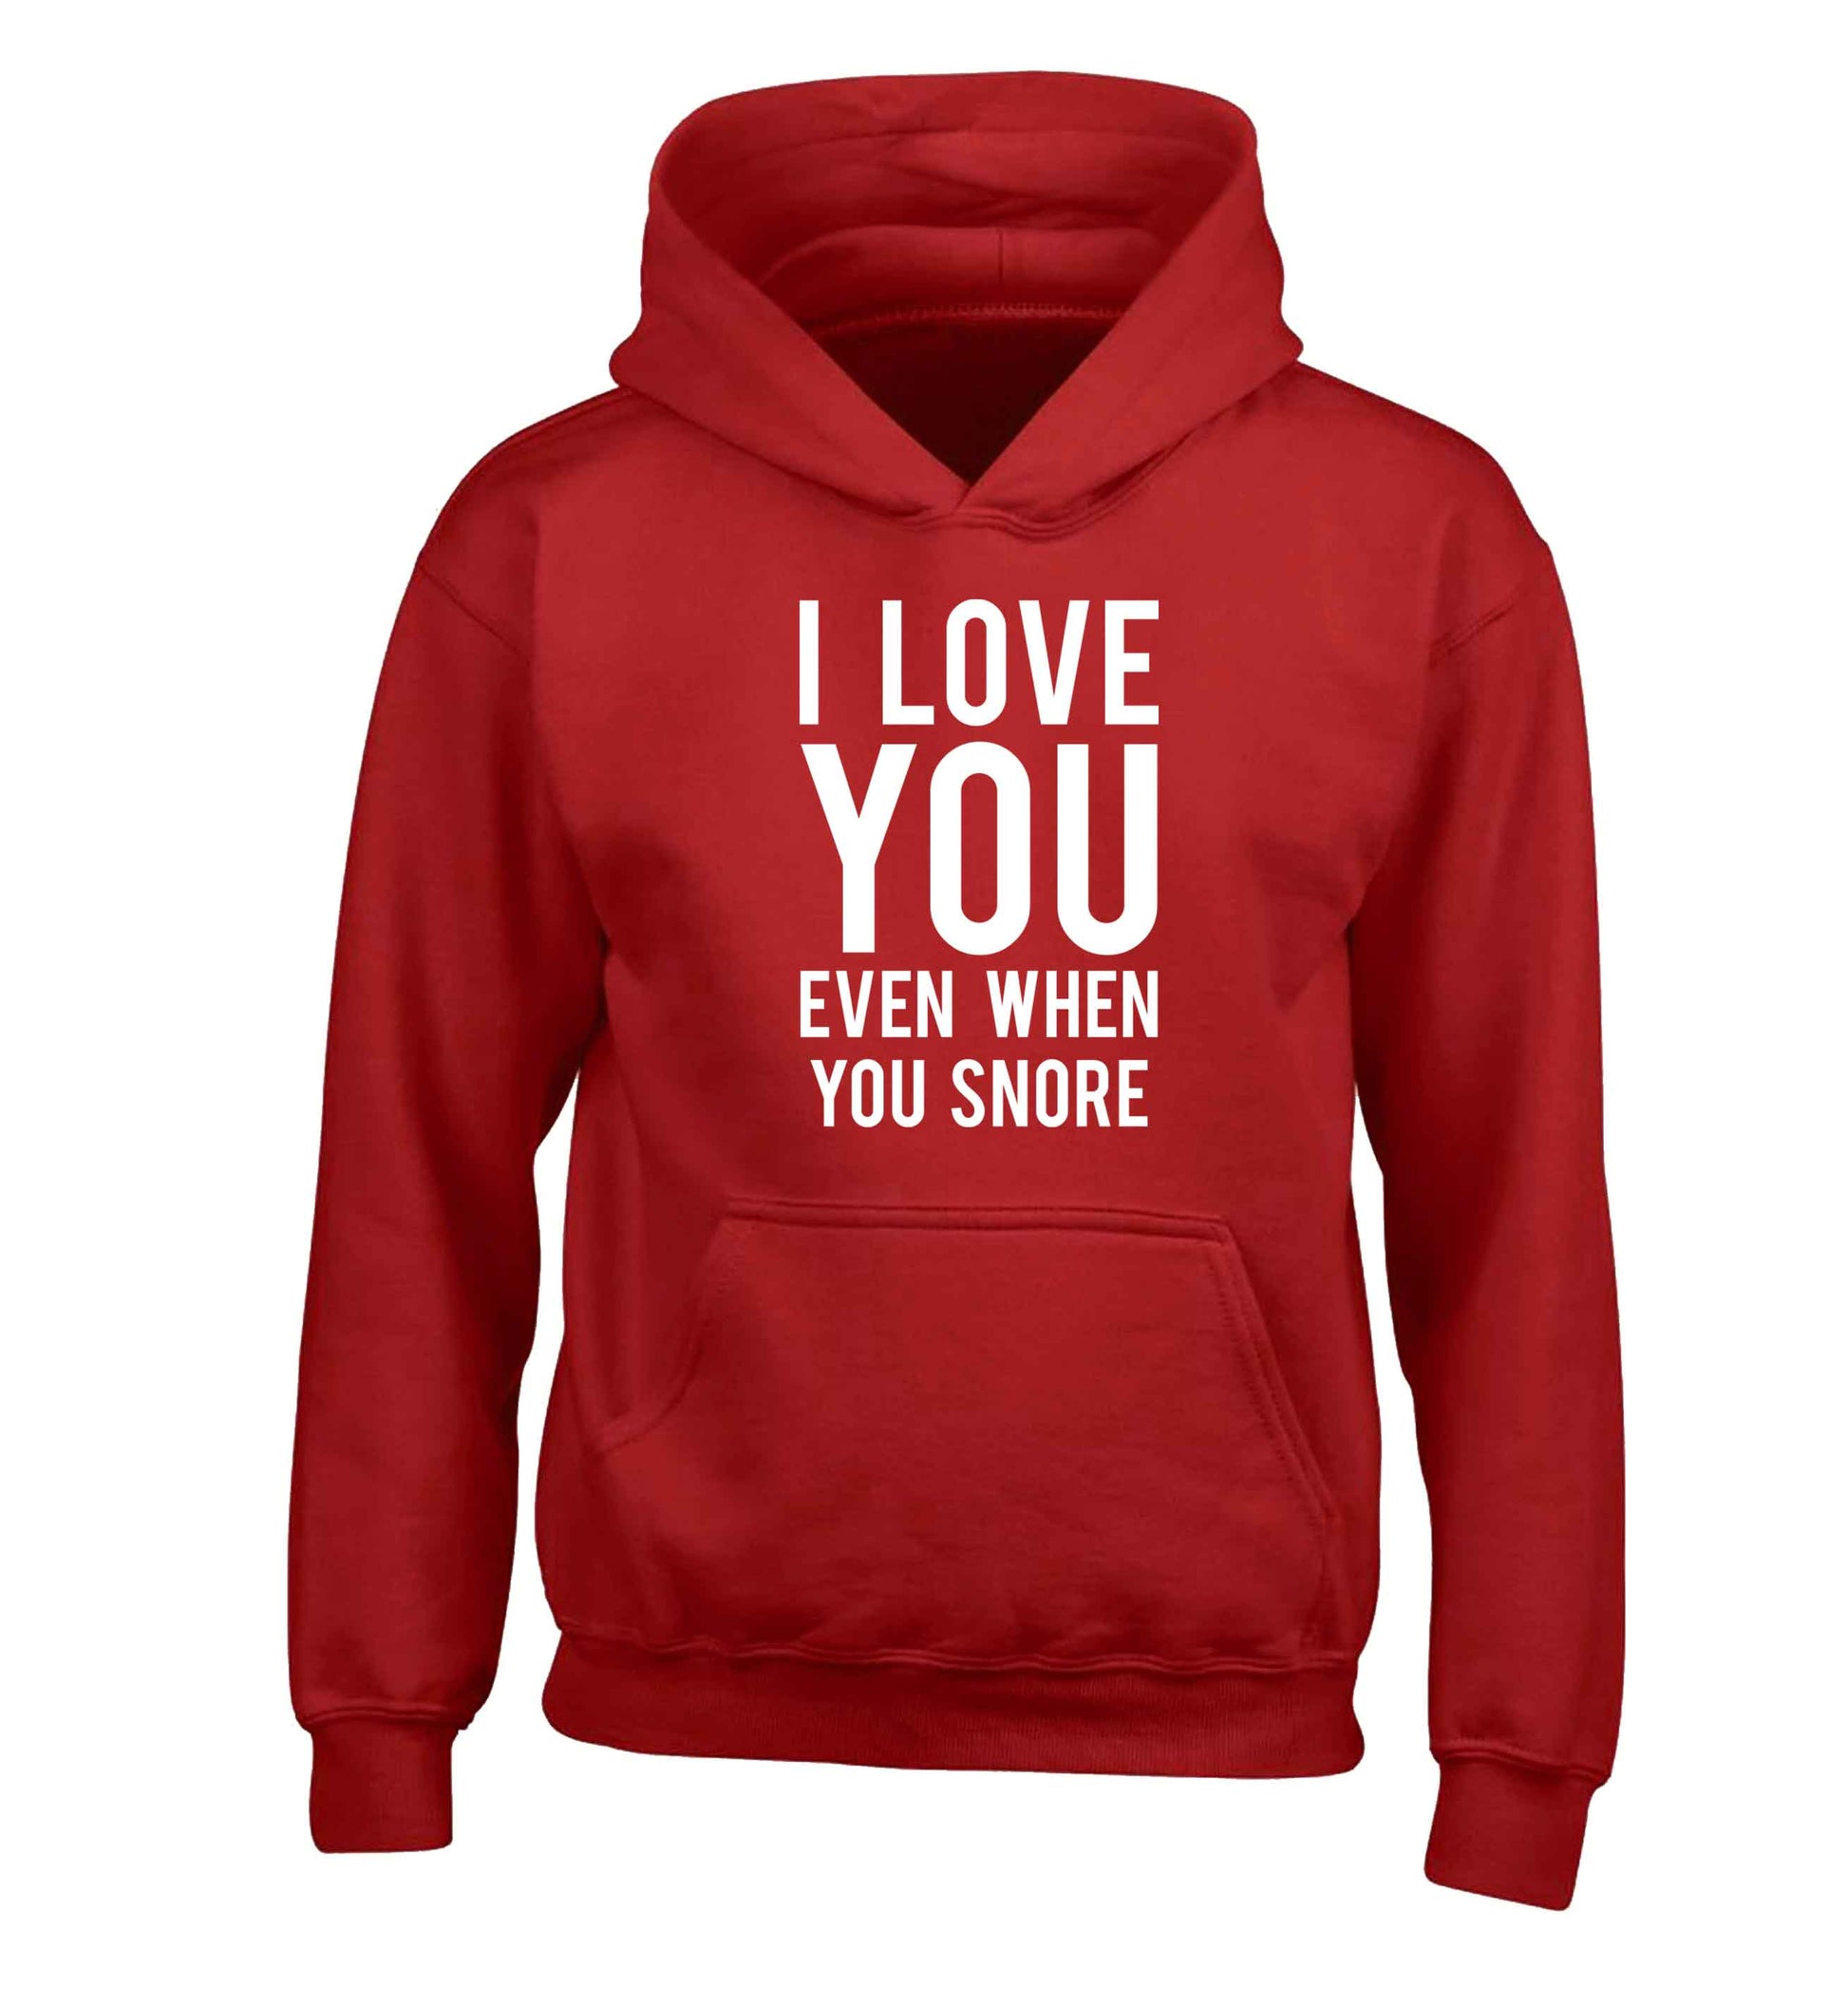 I love you even when you snore children's red hoodie 12-13 Years